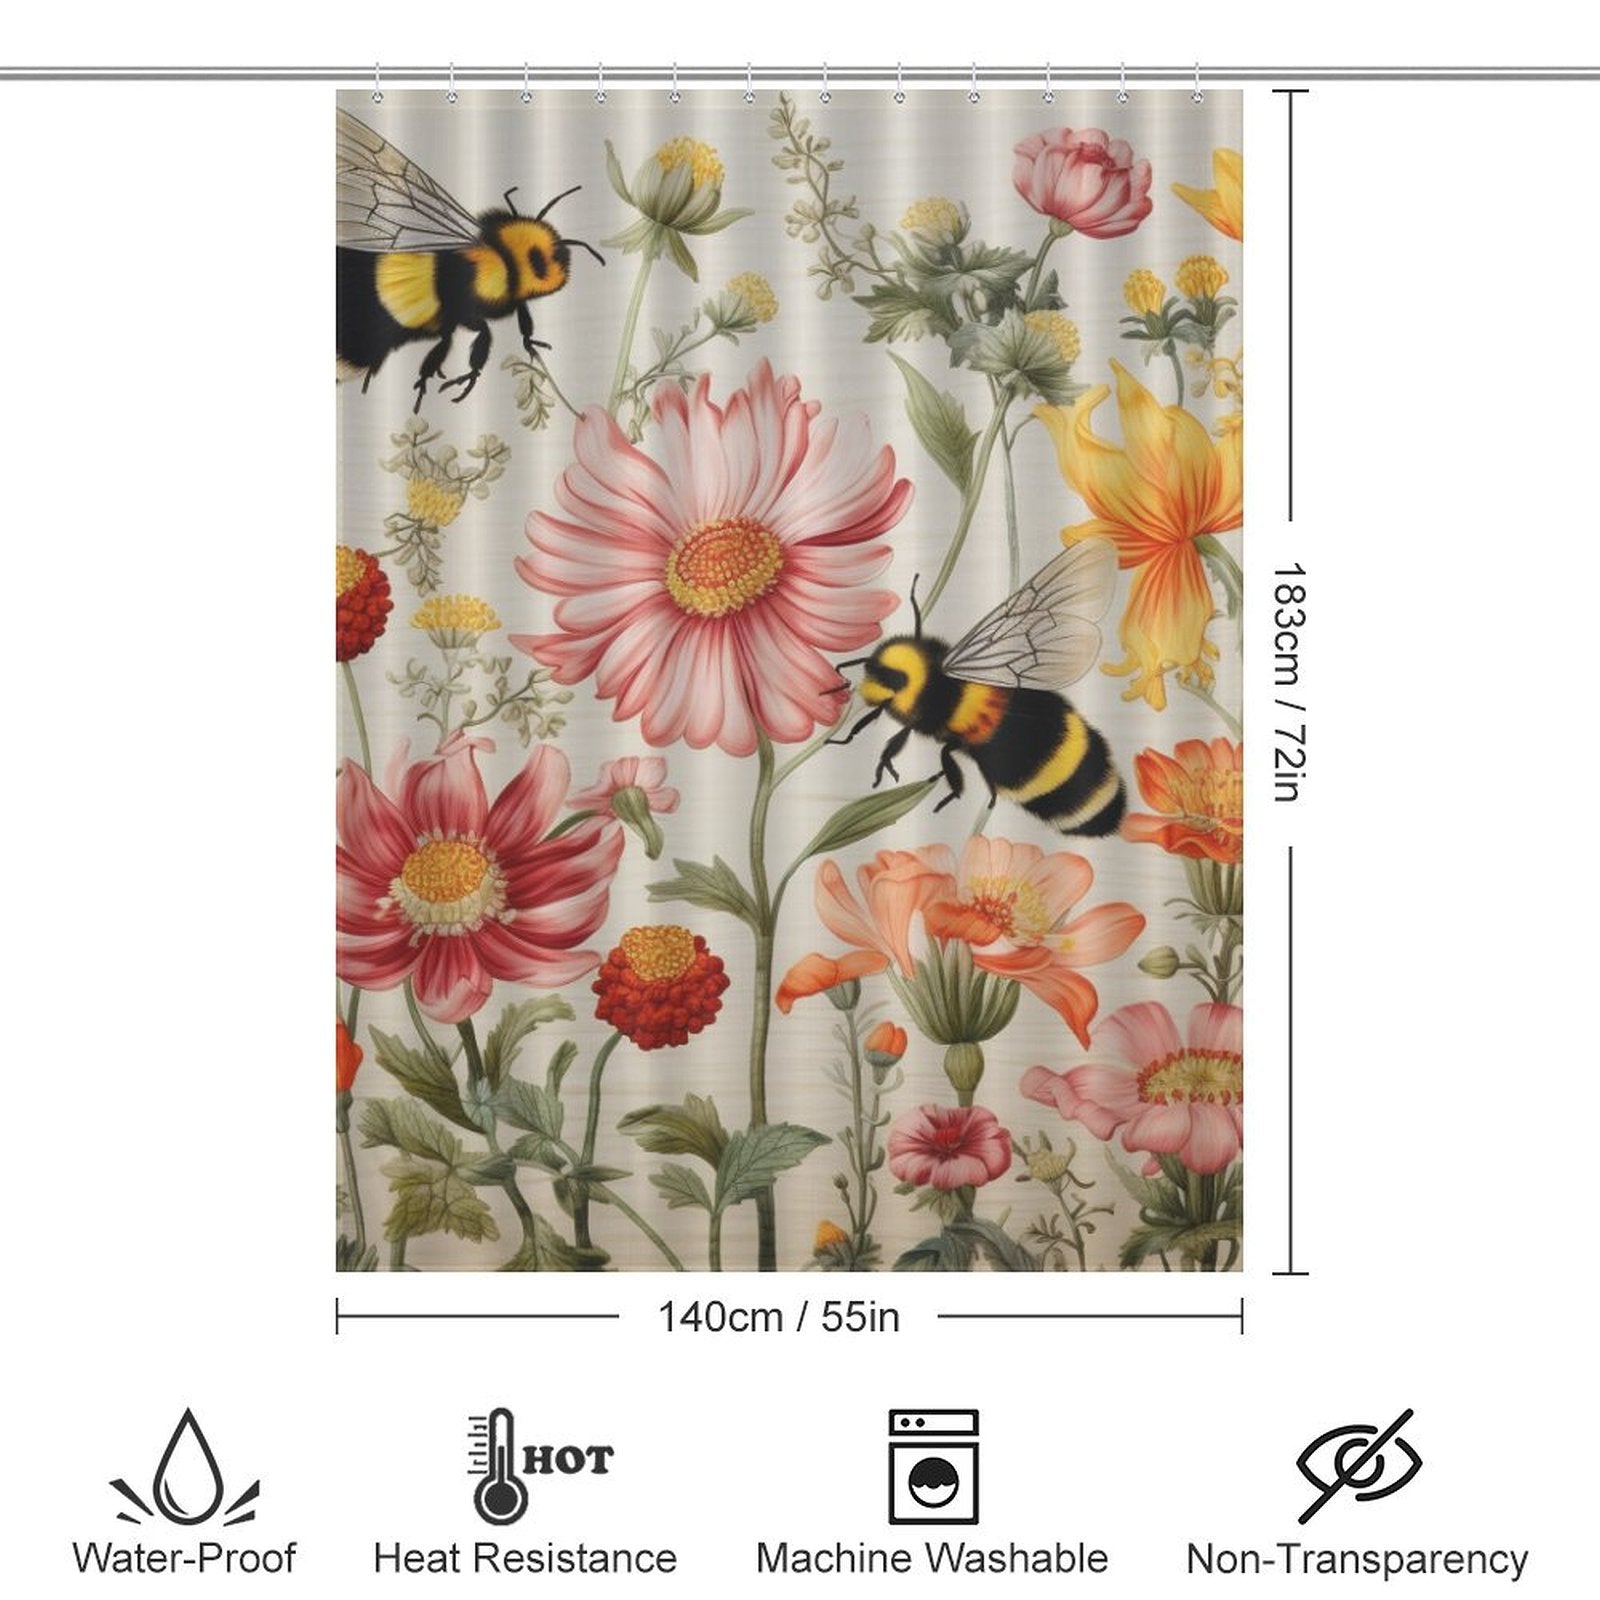 Vibrant Bumble Bee Shower Curtain